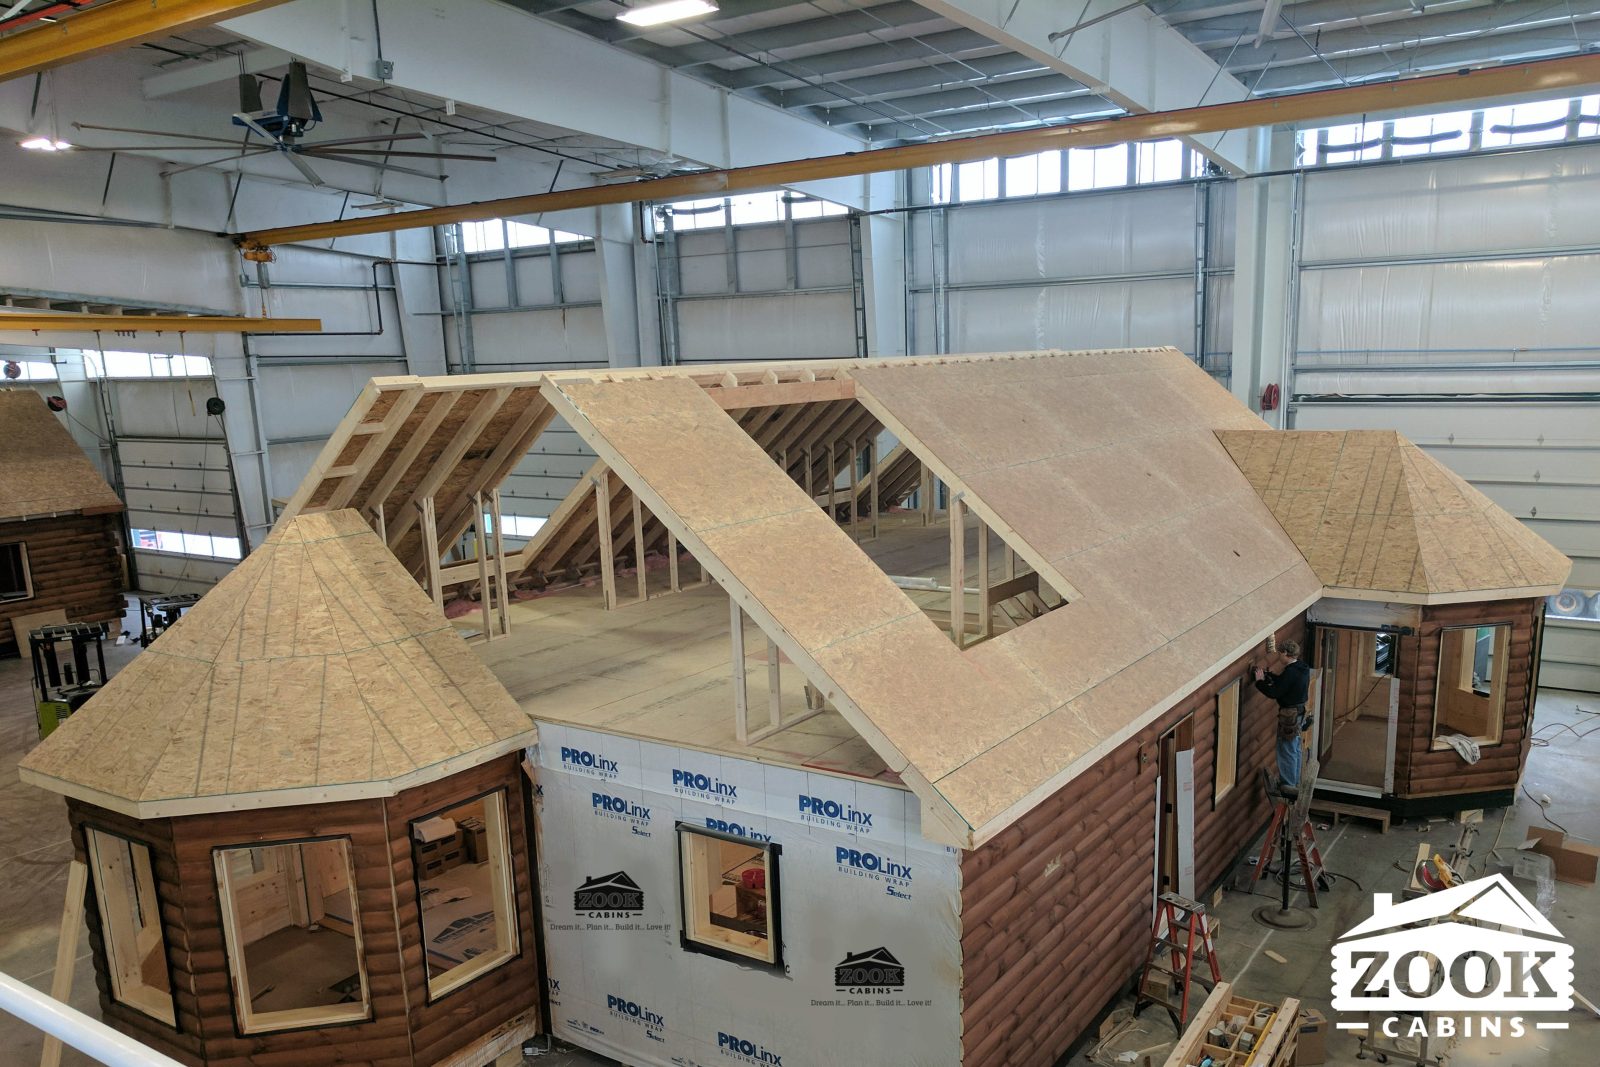 Log Cabins built in a manufacturing facility